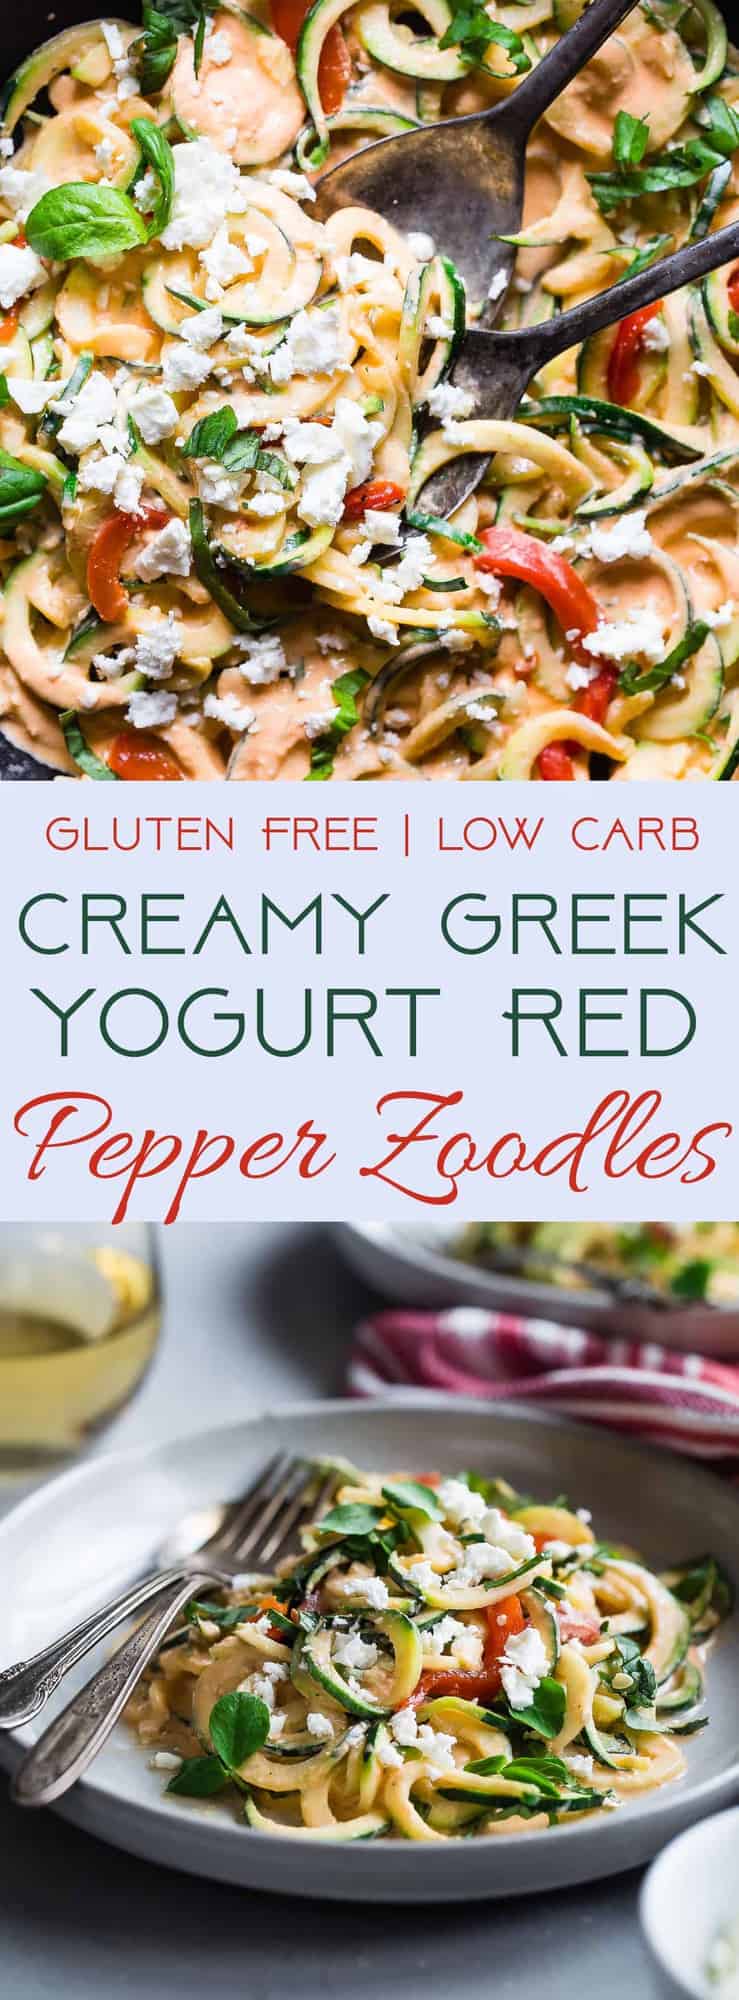 Zucchini Noodles with Roasted Red Pepper Greek Yogurt Sauce - zucchini noodles are covered with a creamy, low carb roasted red pepper sauce for an easy, protein packed, meatless dinner, that is under 300 calories and that the whole family will love! | #Foodfaithfitness | #Lowcarb #Glutenfree #Keto #Greekyogurt #ZucchiniNoodles